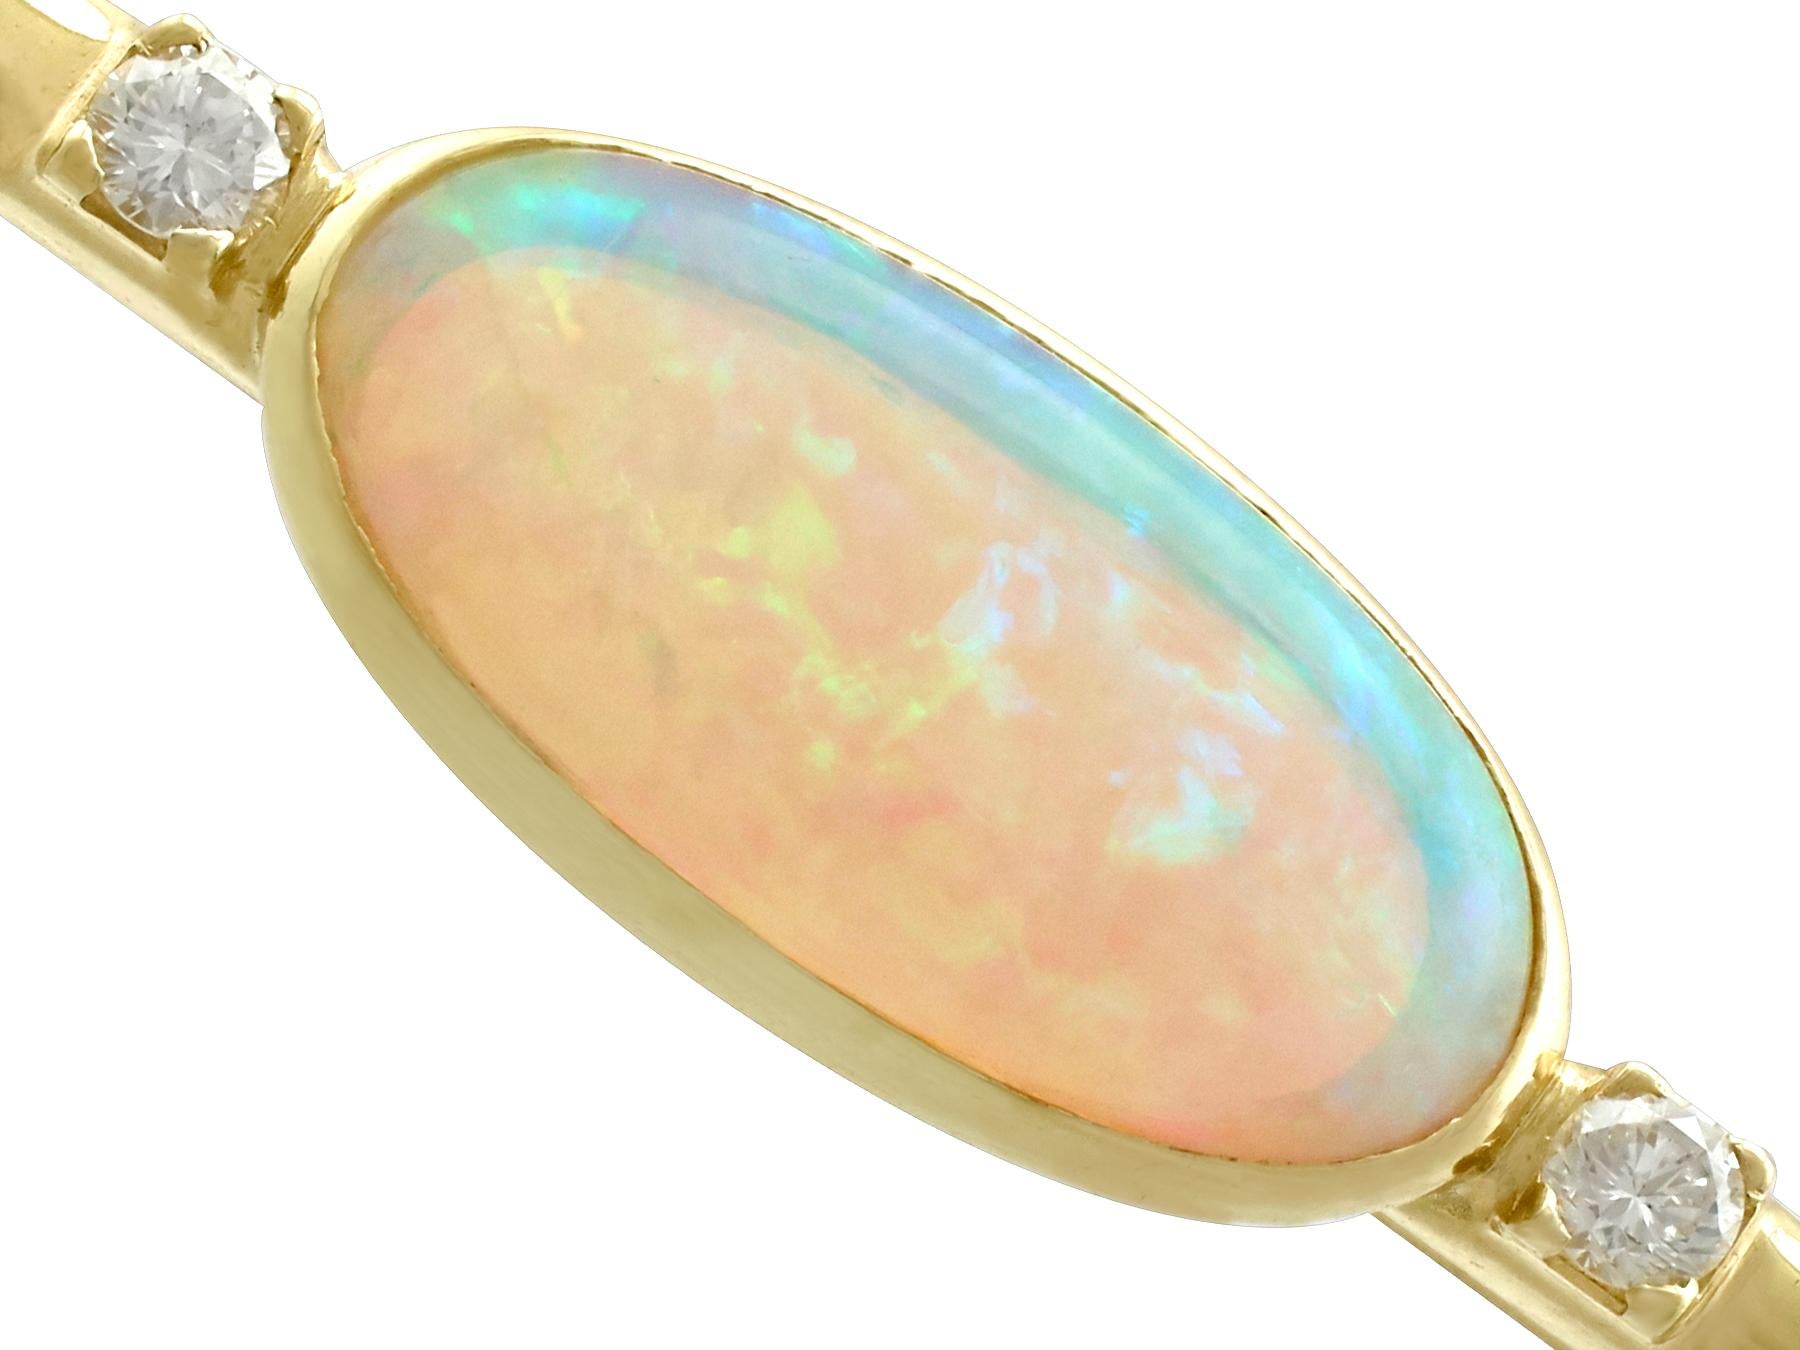 An impressive vintage 5.89 carat opal, 0.28 carat diamond and 18 karat yellow gold bar brooch; part of our diverse vintage estate jewelry collections

This fine and impressive vintage opal bar brooch has been crafted in 18 k yellow gold.

The brooch